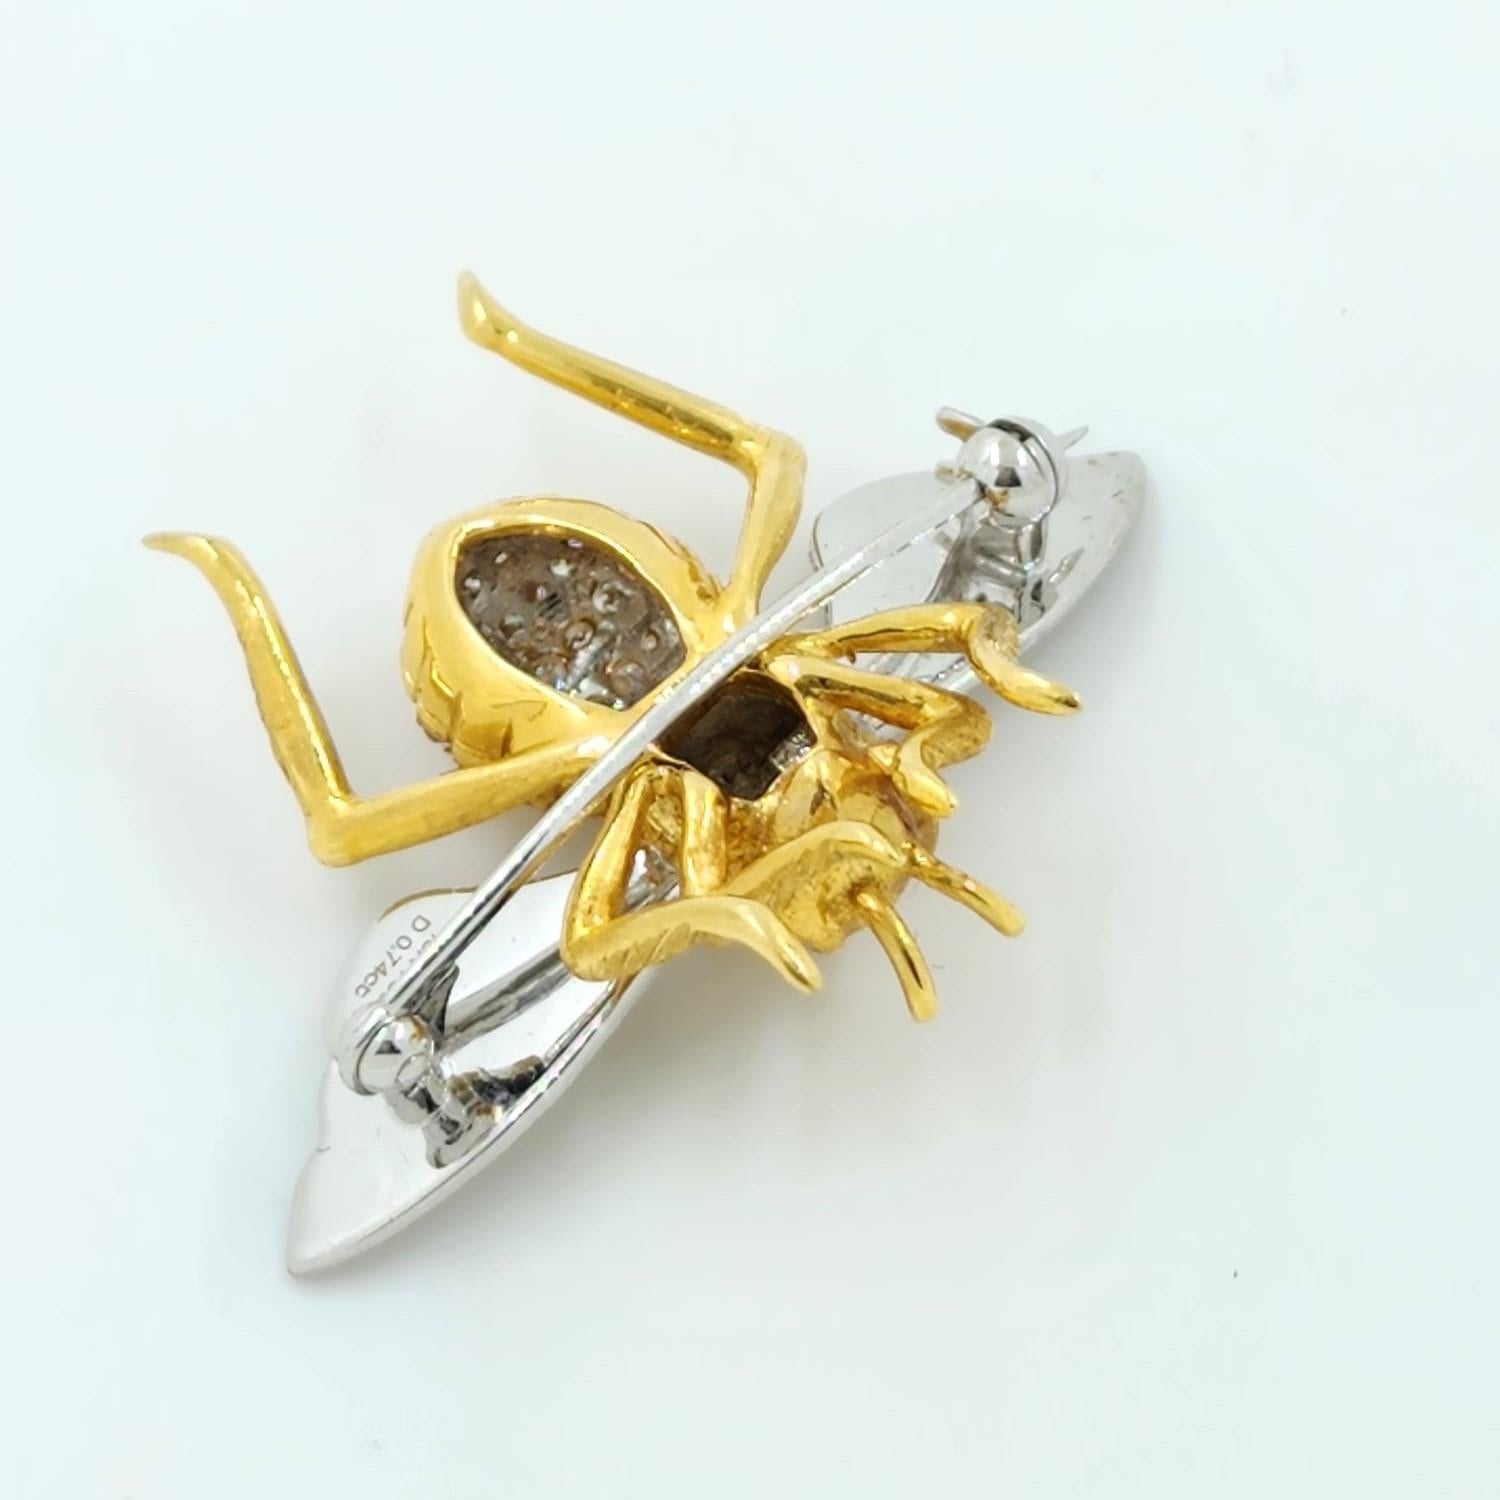 Bee lover be alert ! This bee brooch / pin is handcrafted and set in 18 karat white and yellow gold. The latter is set with 0.74 carat of brilliant cut diamonds. The wing is make with 18 karat white gold with a silky-like finishing. The bee offer